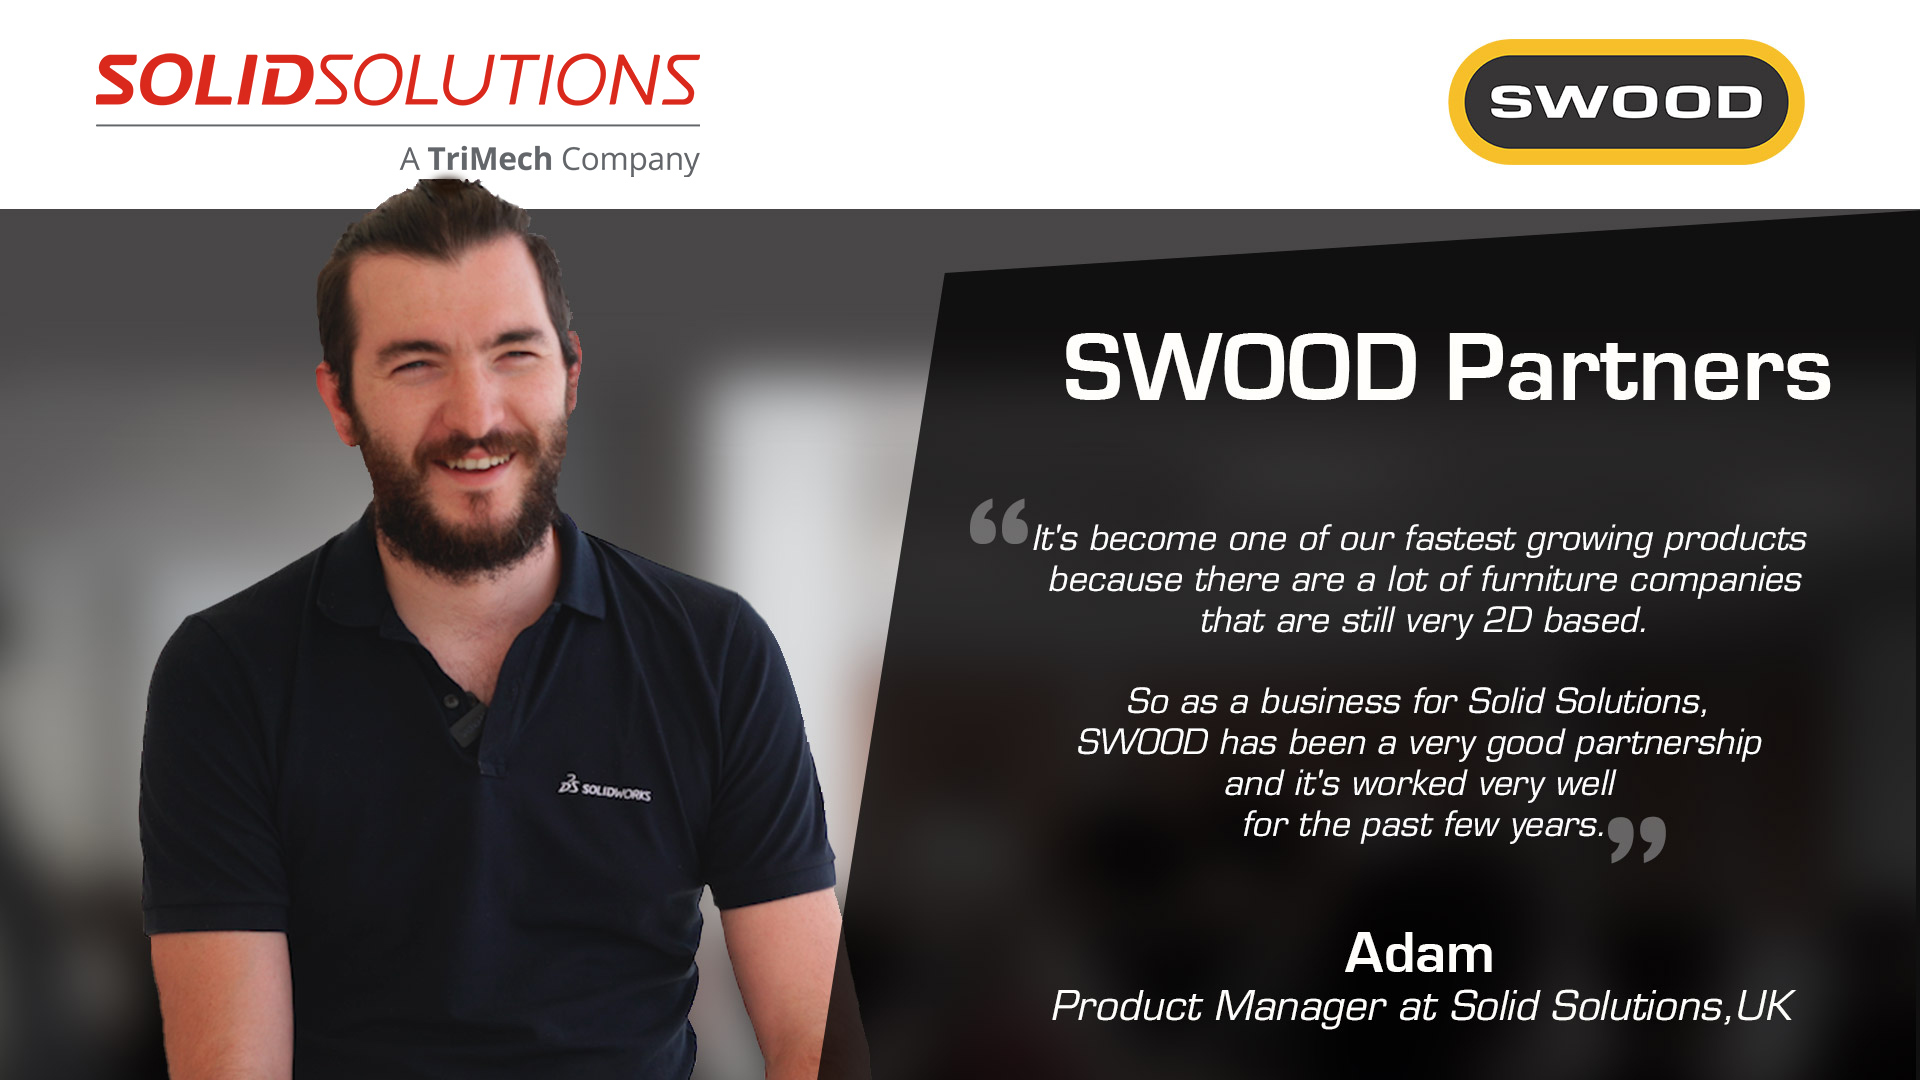 SWOOD and Solid Solutions